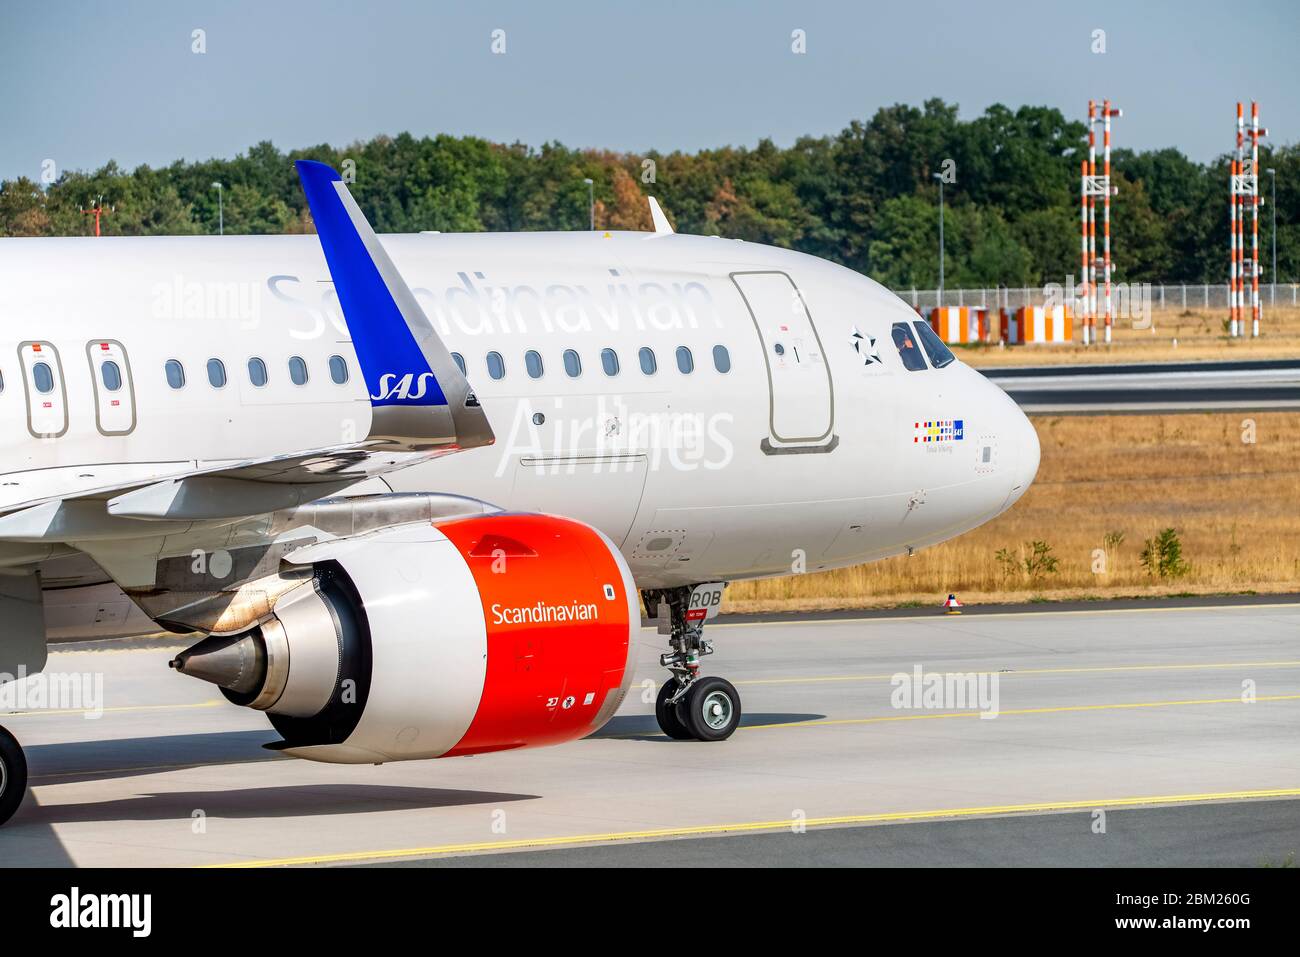 Frankfurt, Hesse/Germany - 29.08.2019: Airbus A320 (SE-ROB) from SAS on the tarmac of the northwest runway of Frankfurt Airport Stock Photo